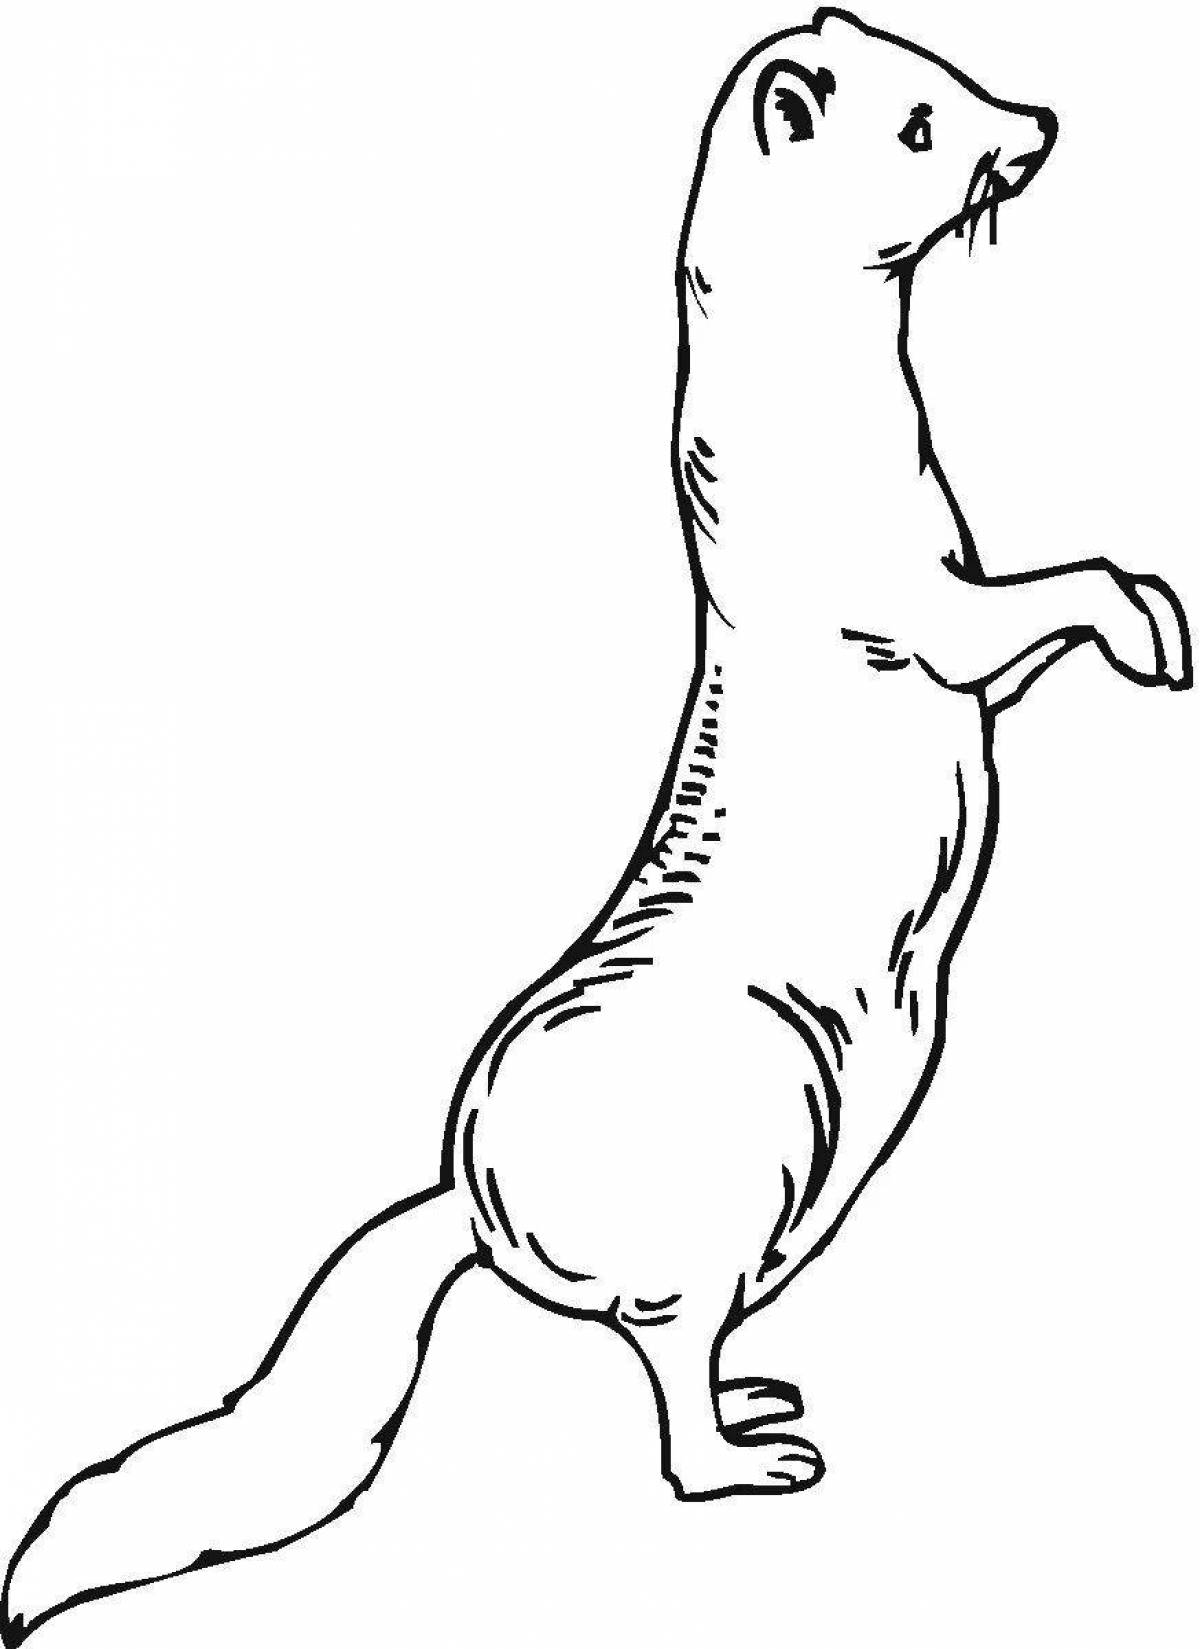 Coloring page wild european mink